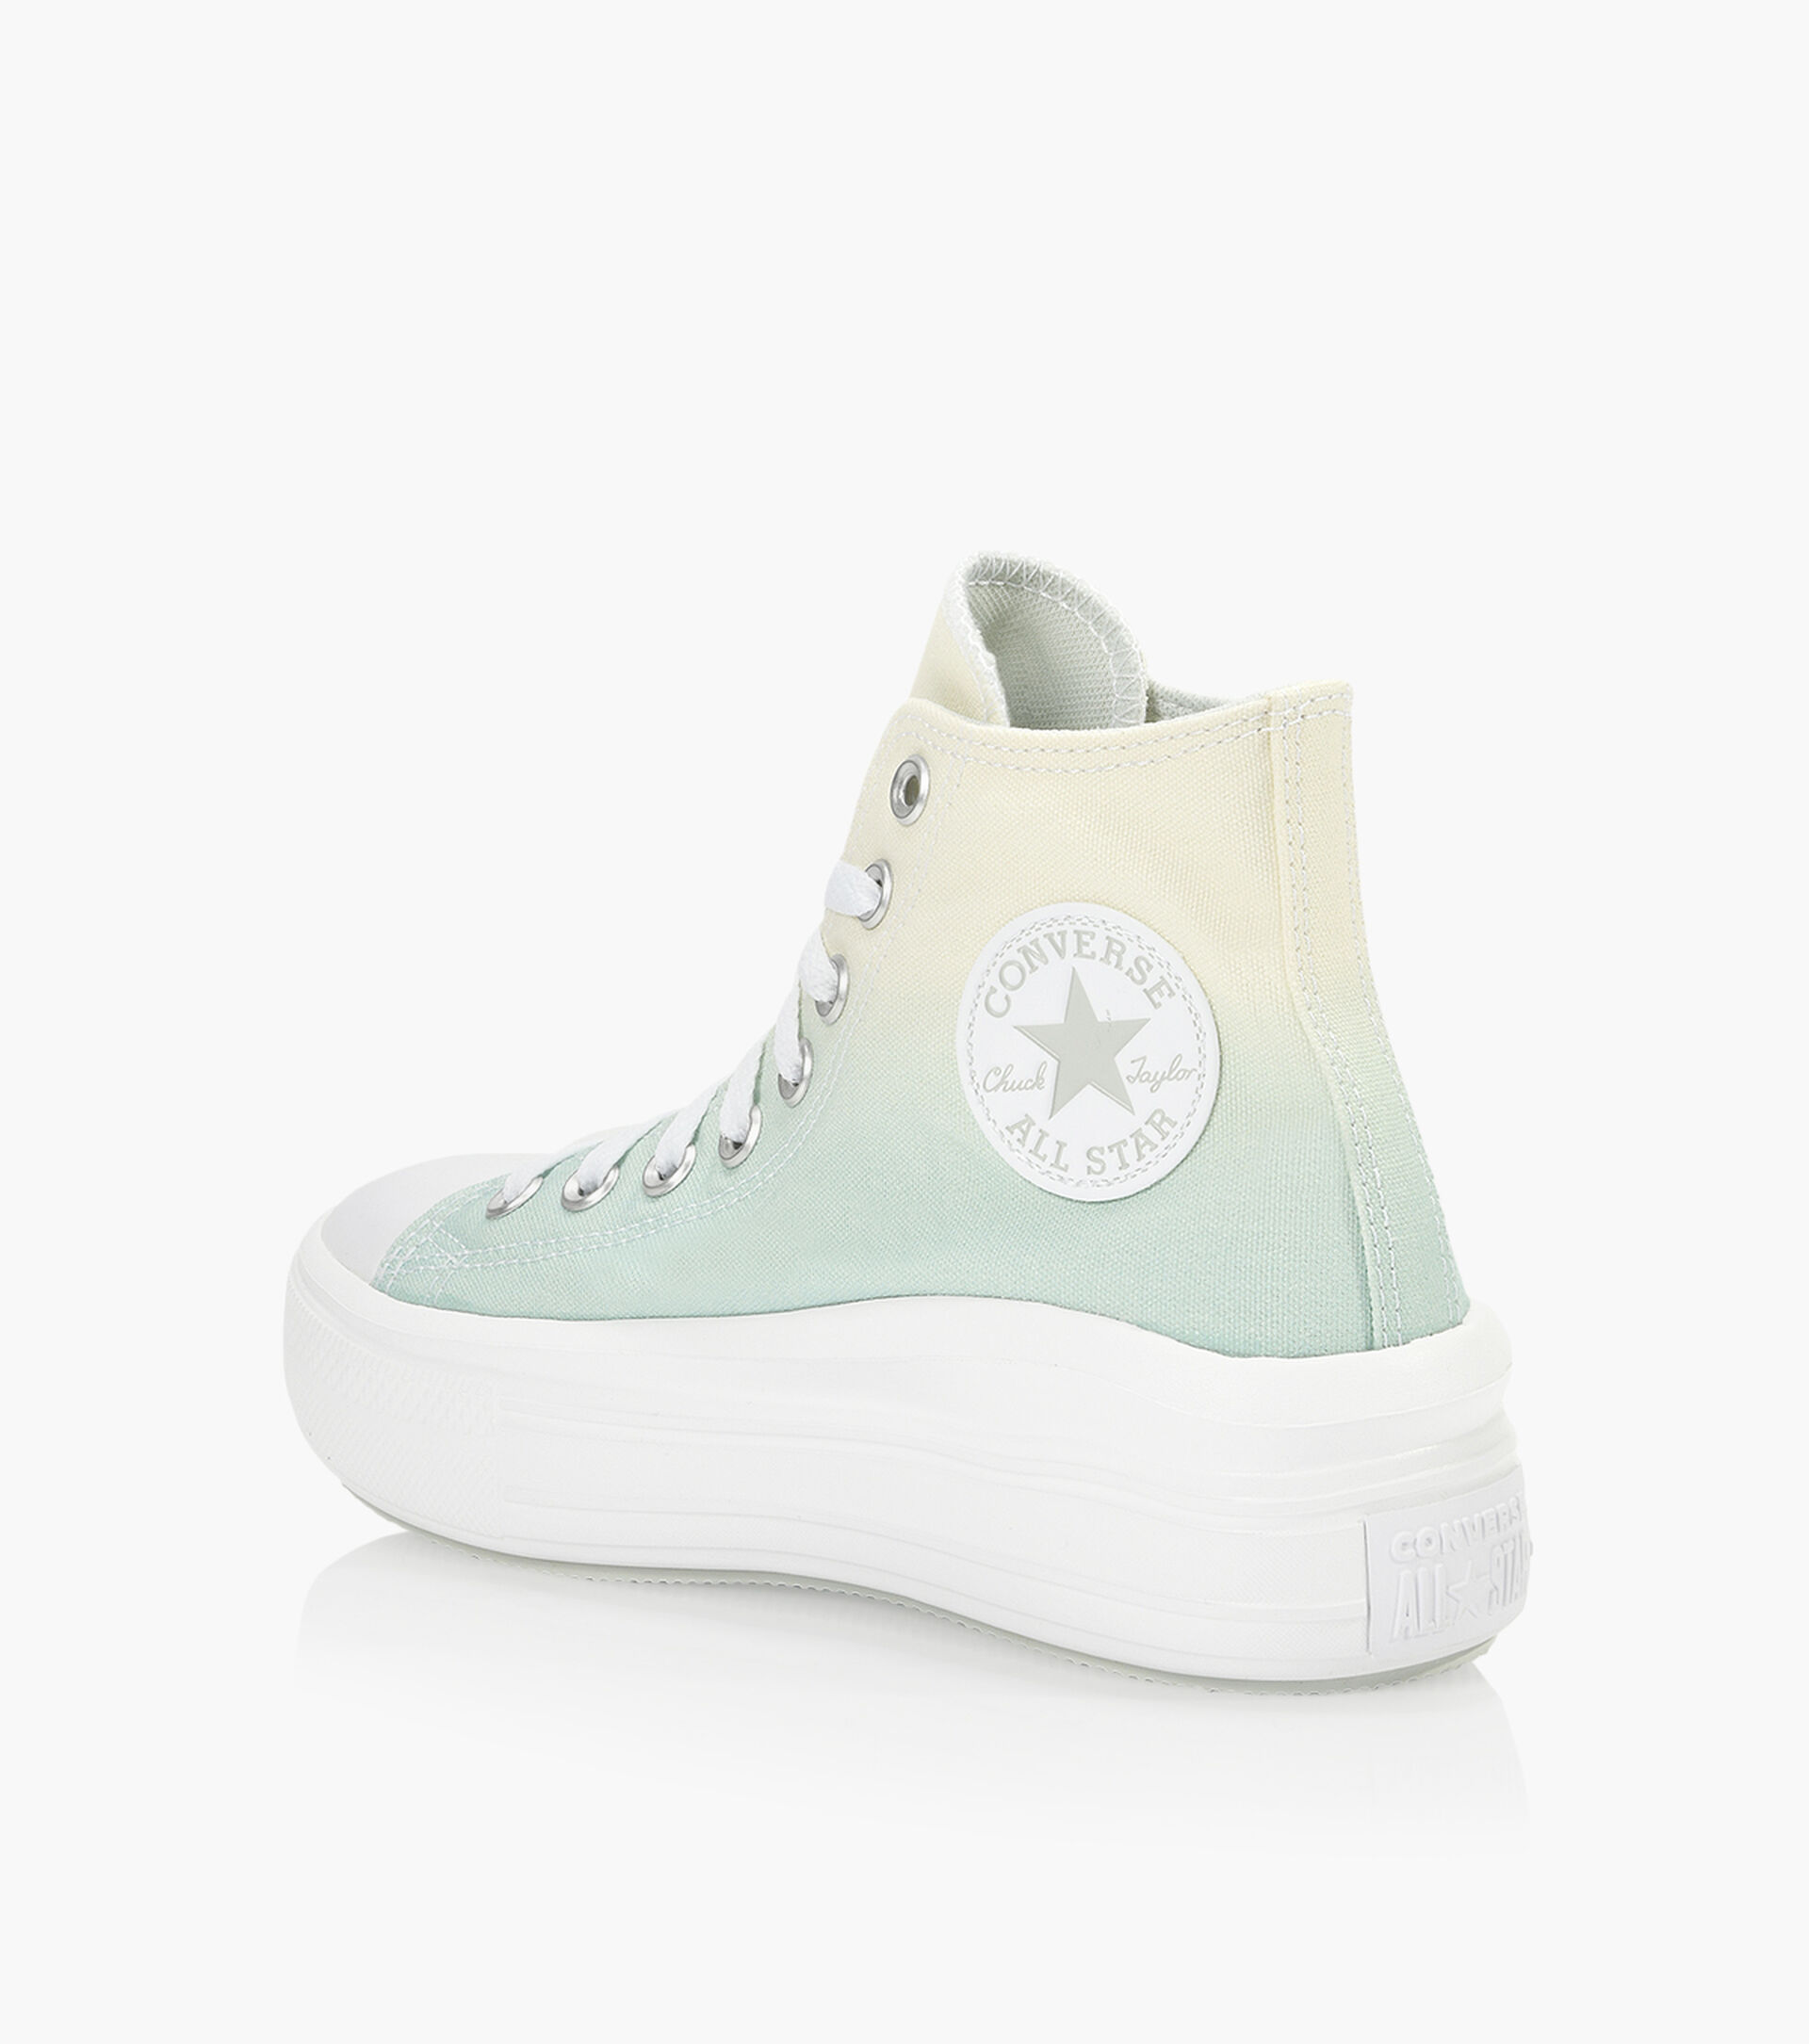 CONVERSE CHUCK TAYLOR ALL STAR MOVE HI - Blue Fabric | Browns Shoes